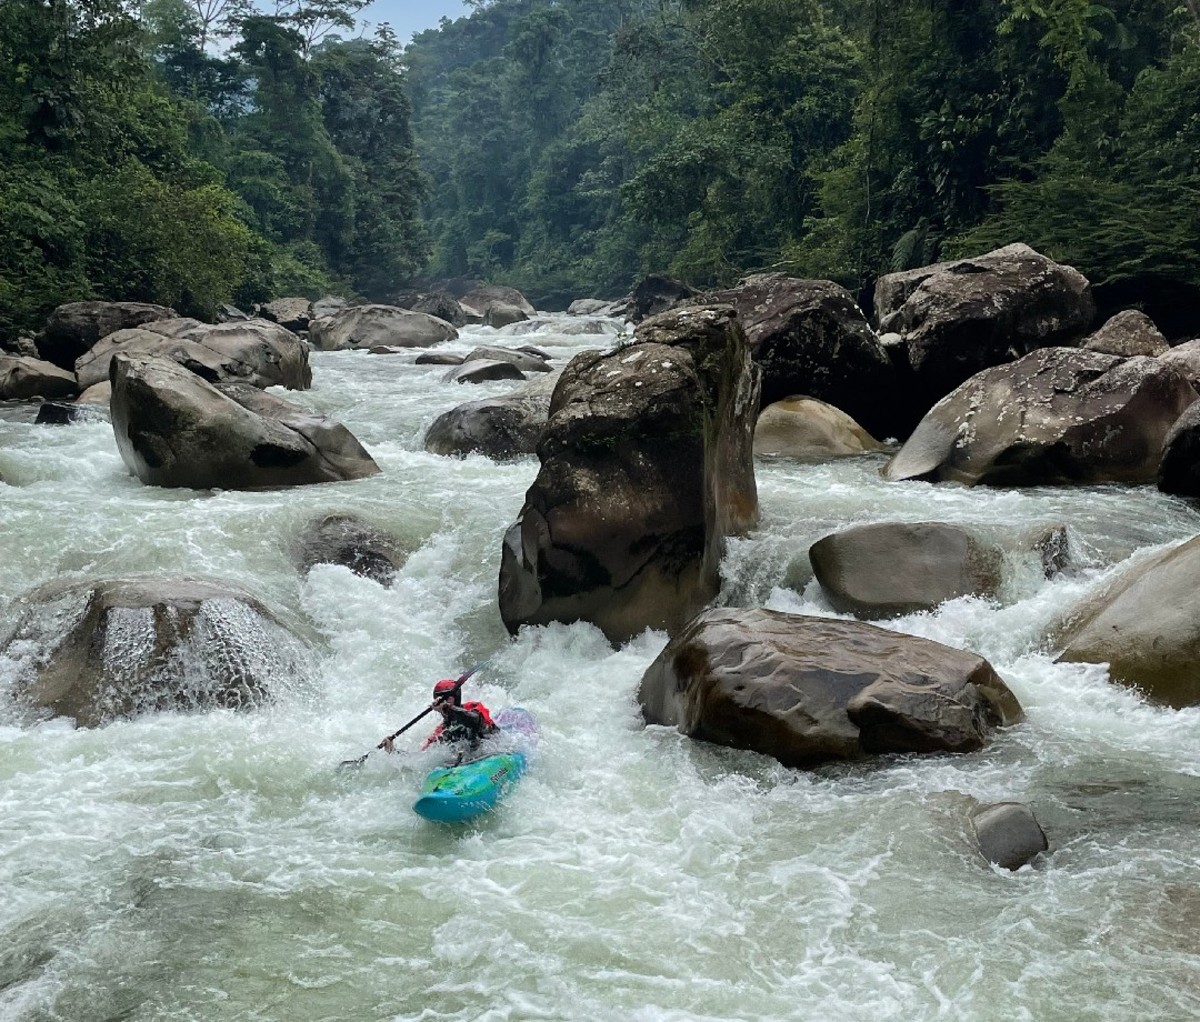 Kayaker slaloms through a rocky patch of whitewater in Ecuador